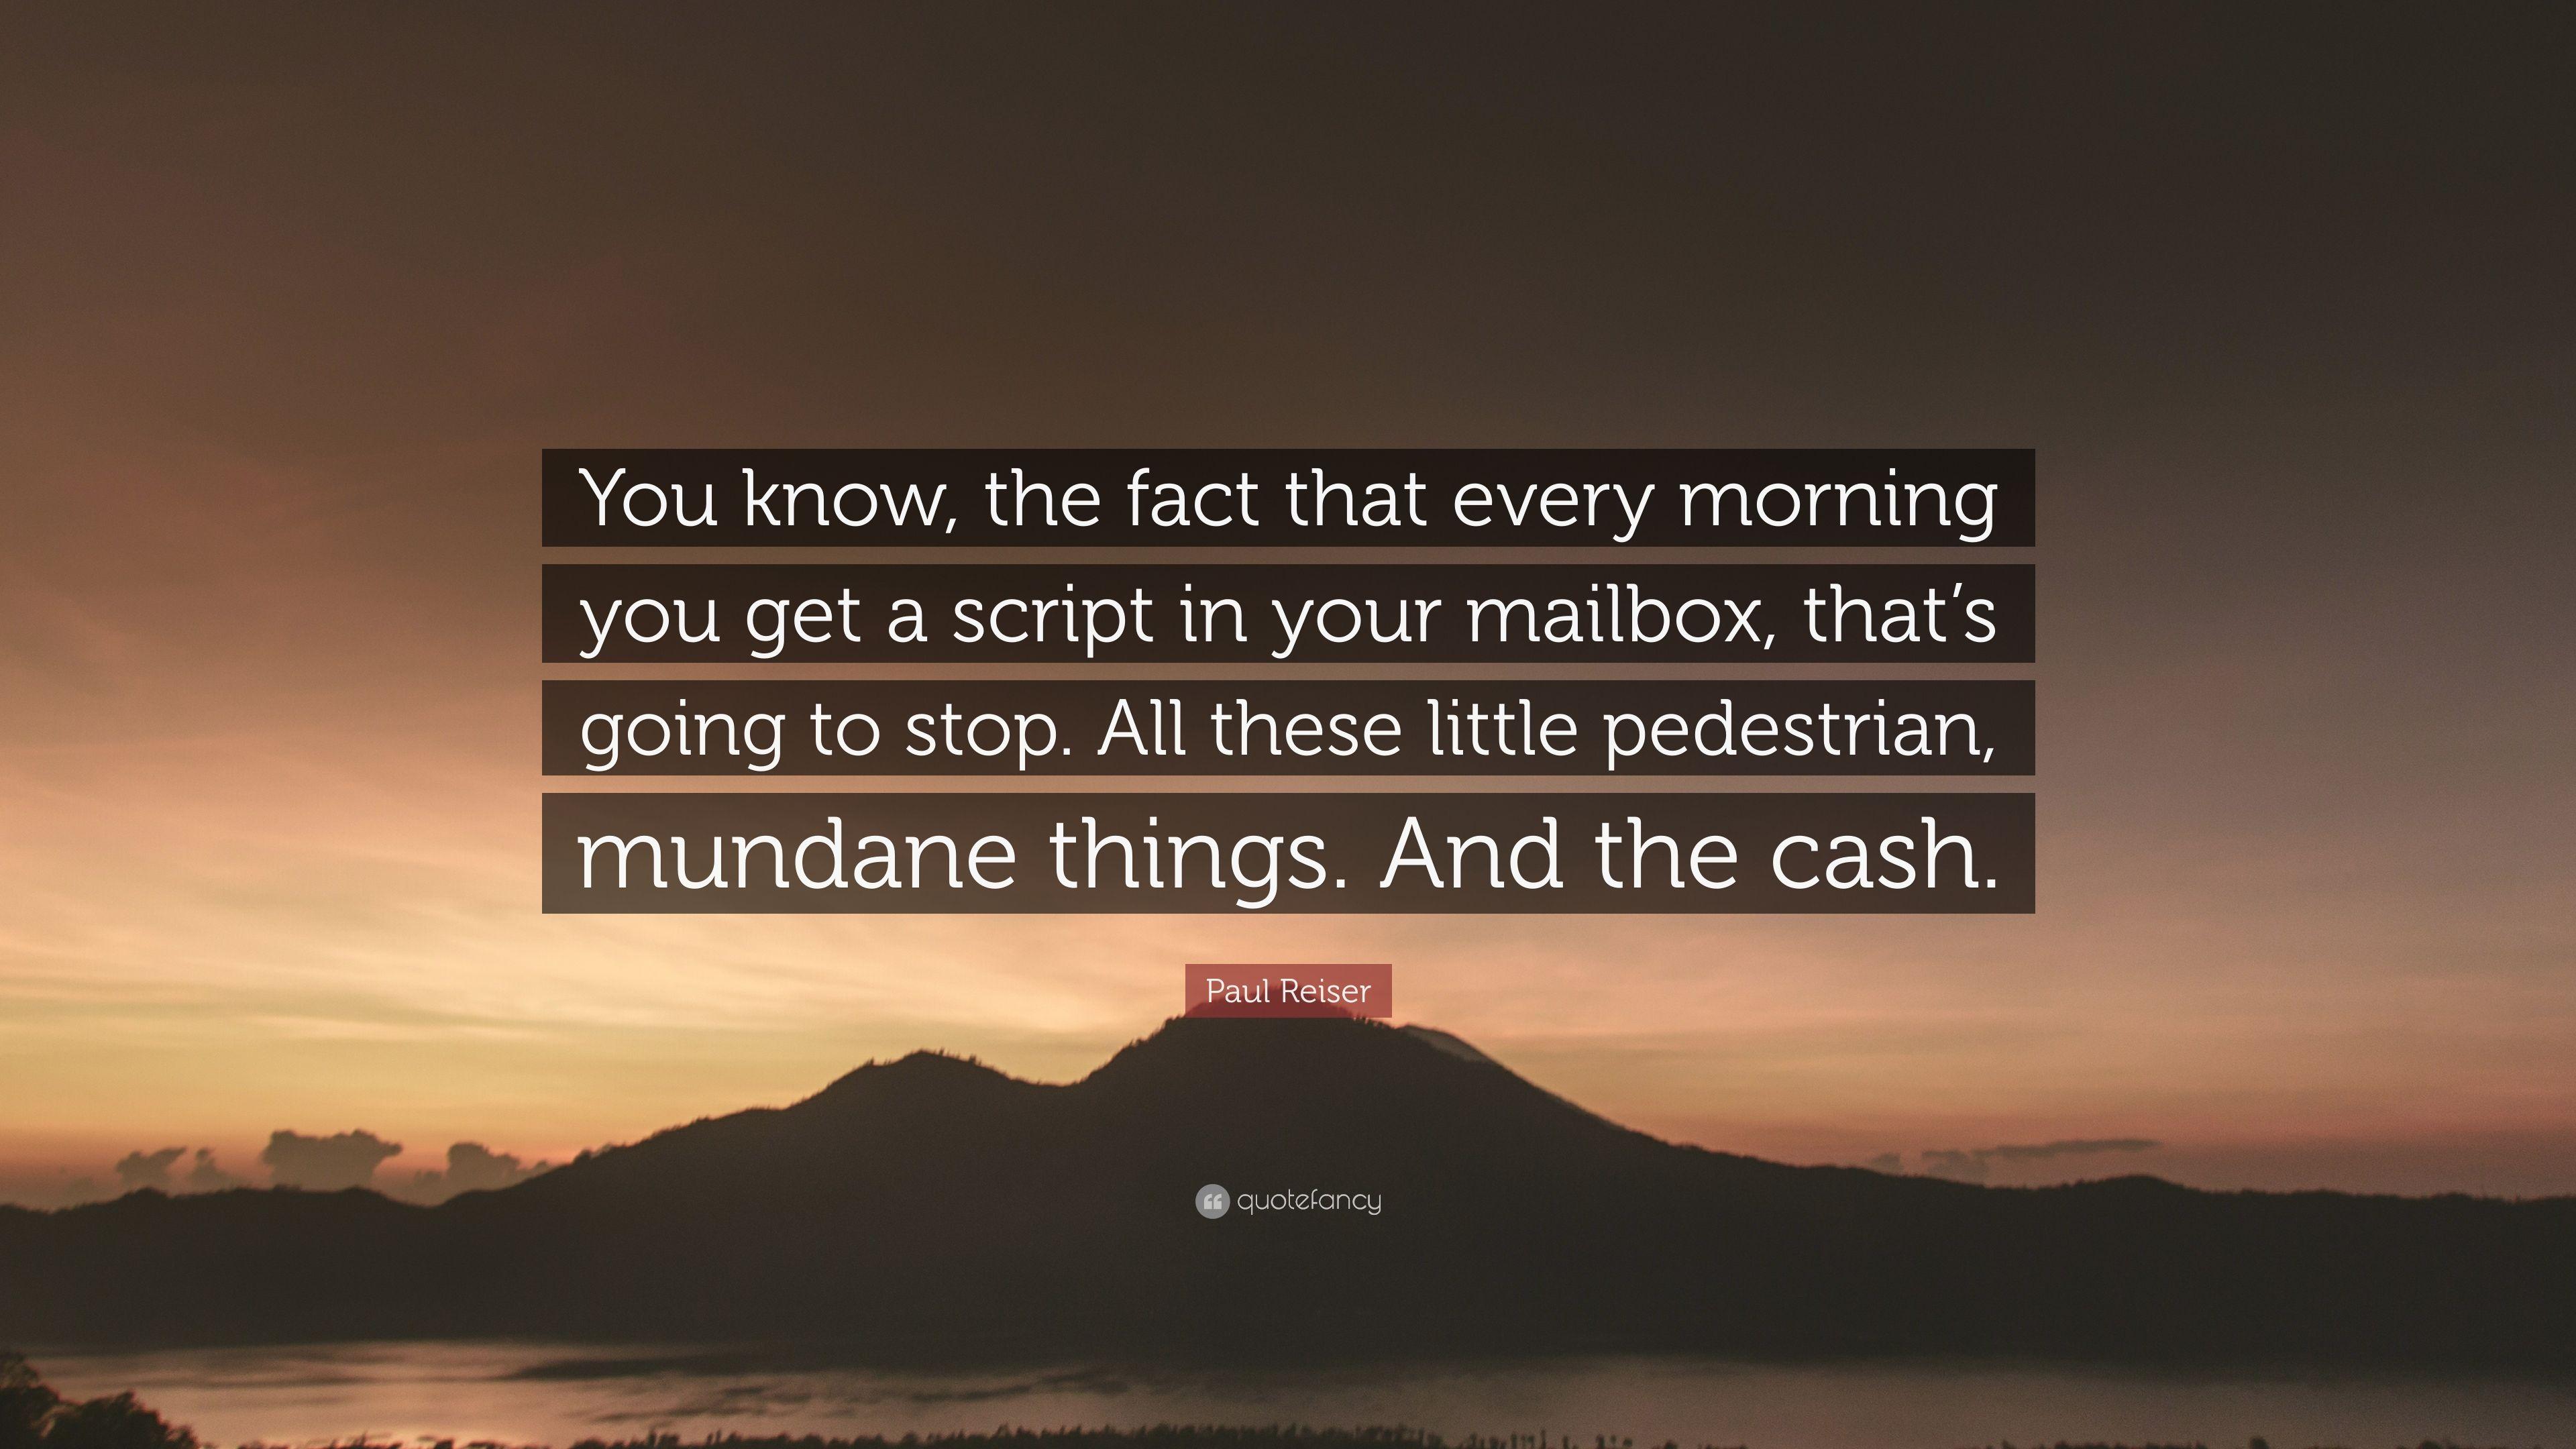 Paul Reiser Quote: “You know, the fact that every morning you get